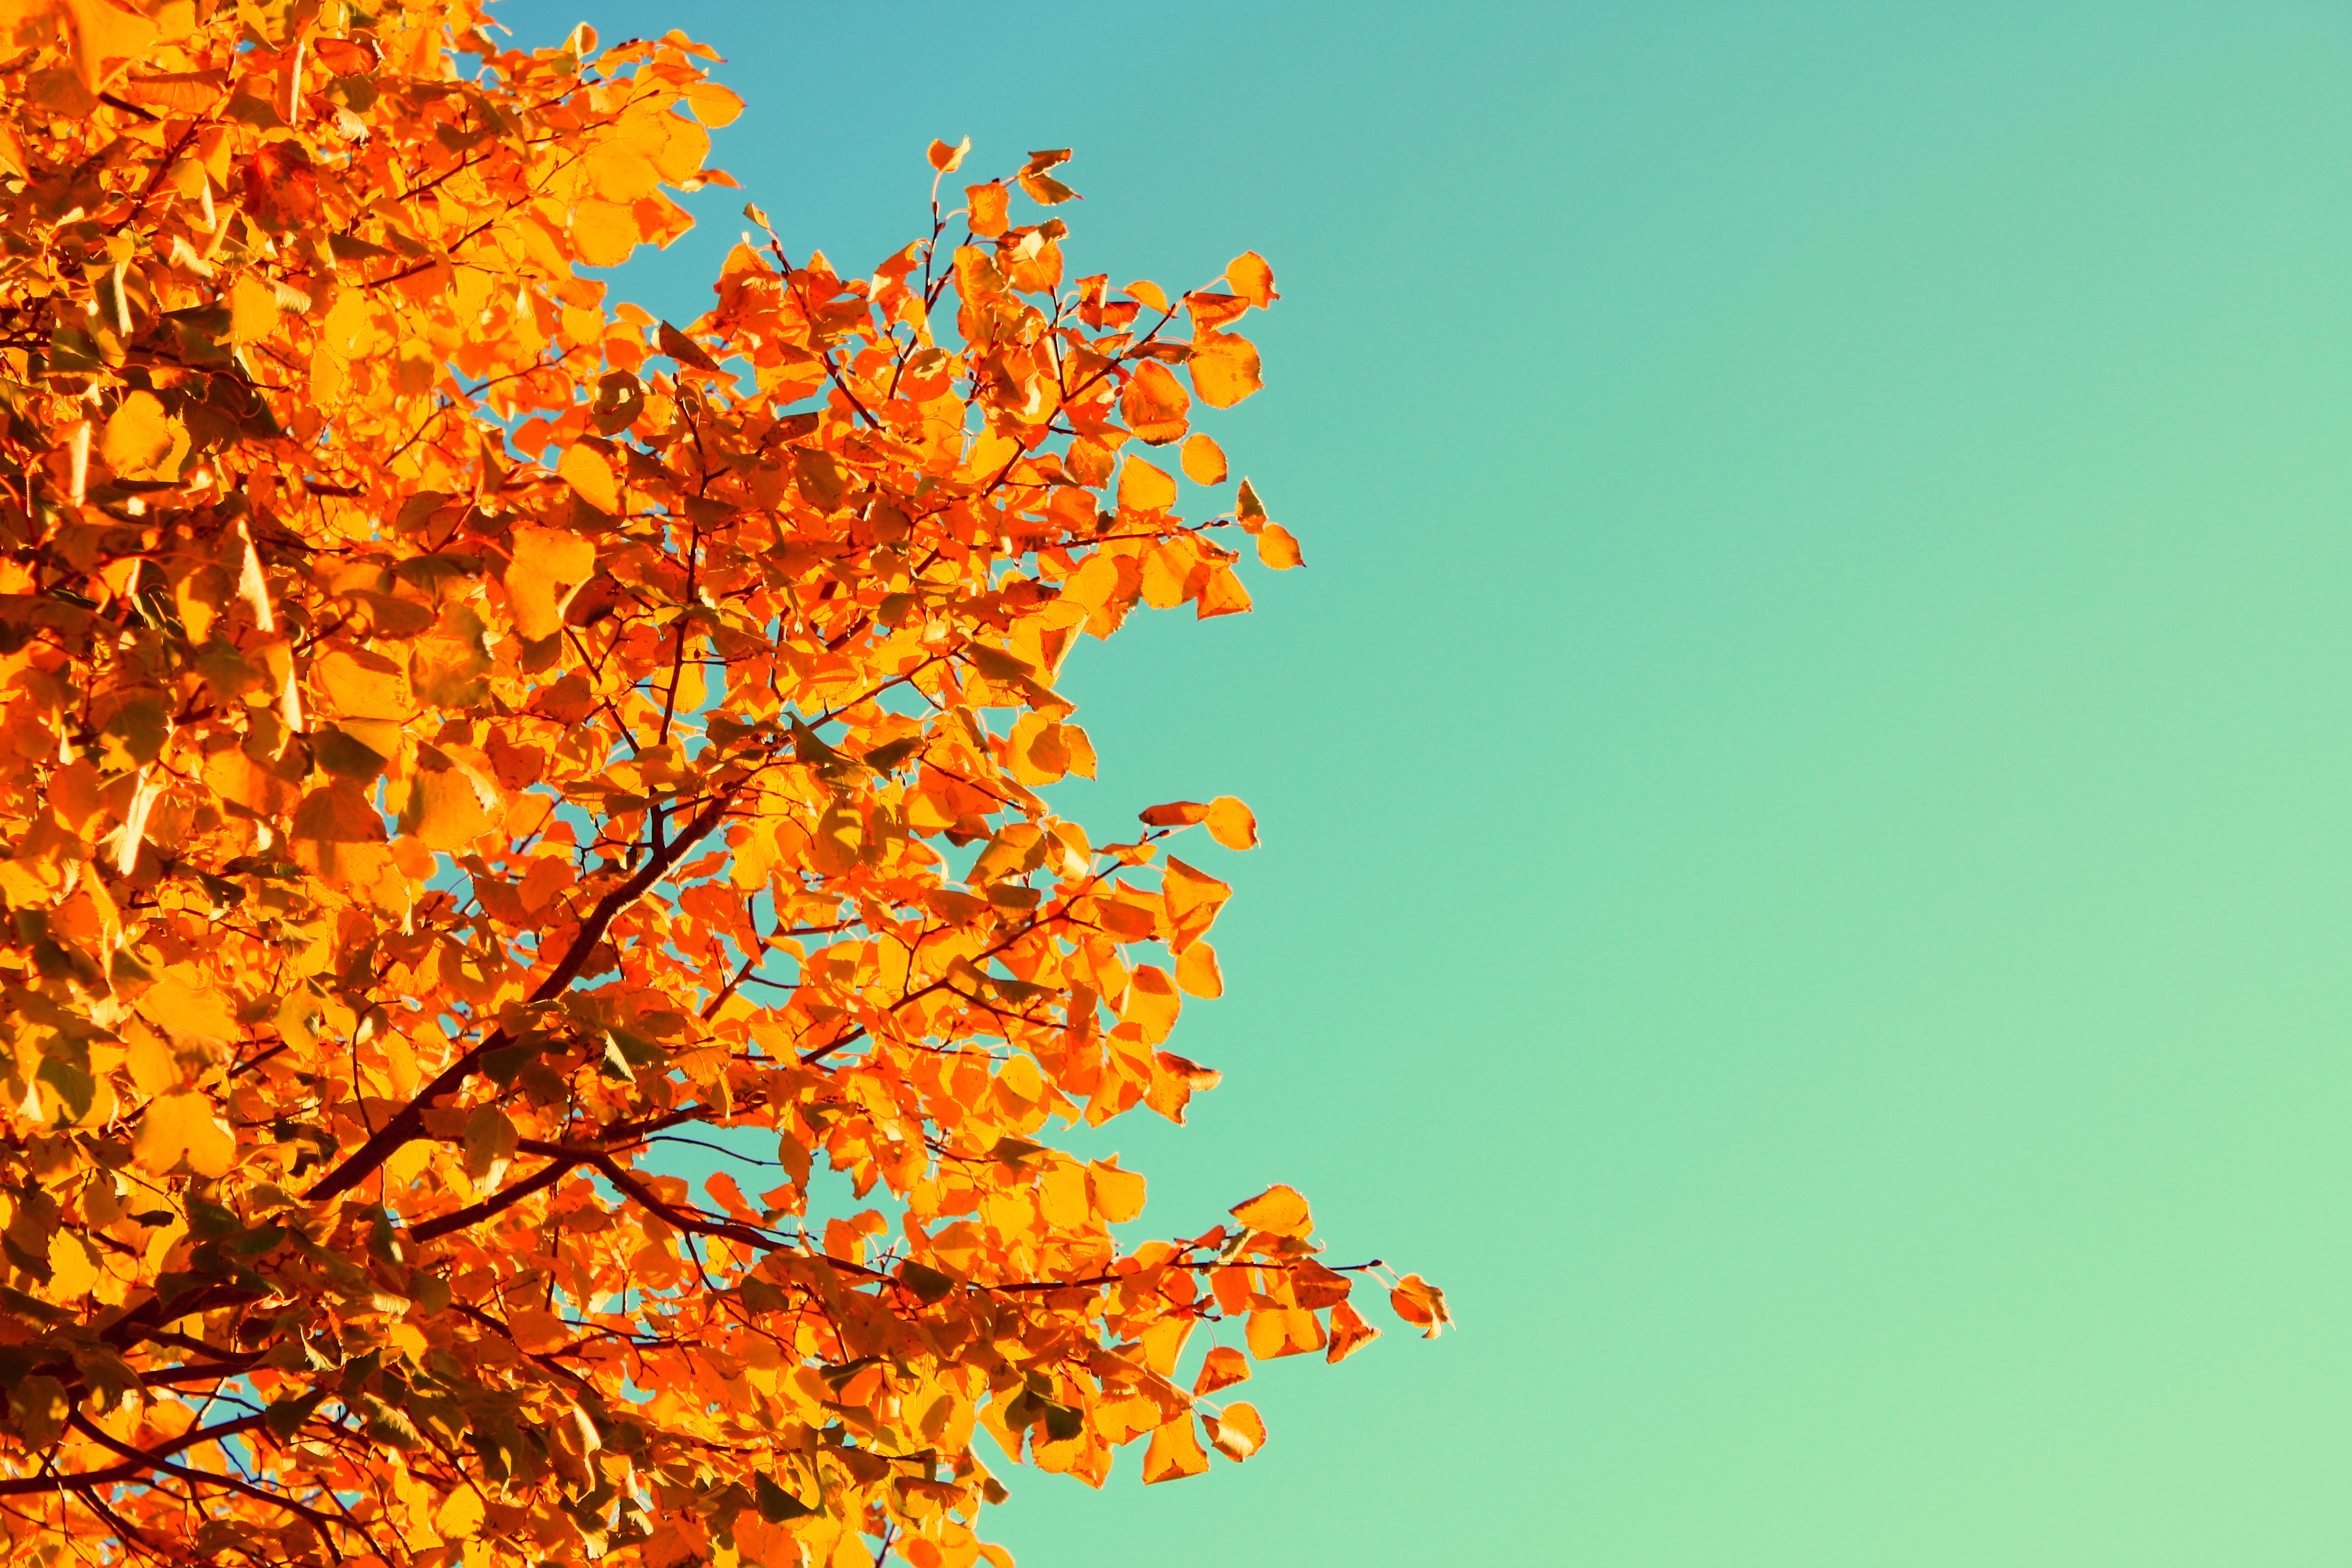 Five Simple Ways to Celebrate the Autumn Equinox